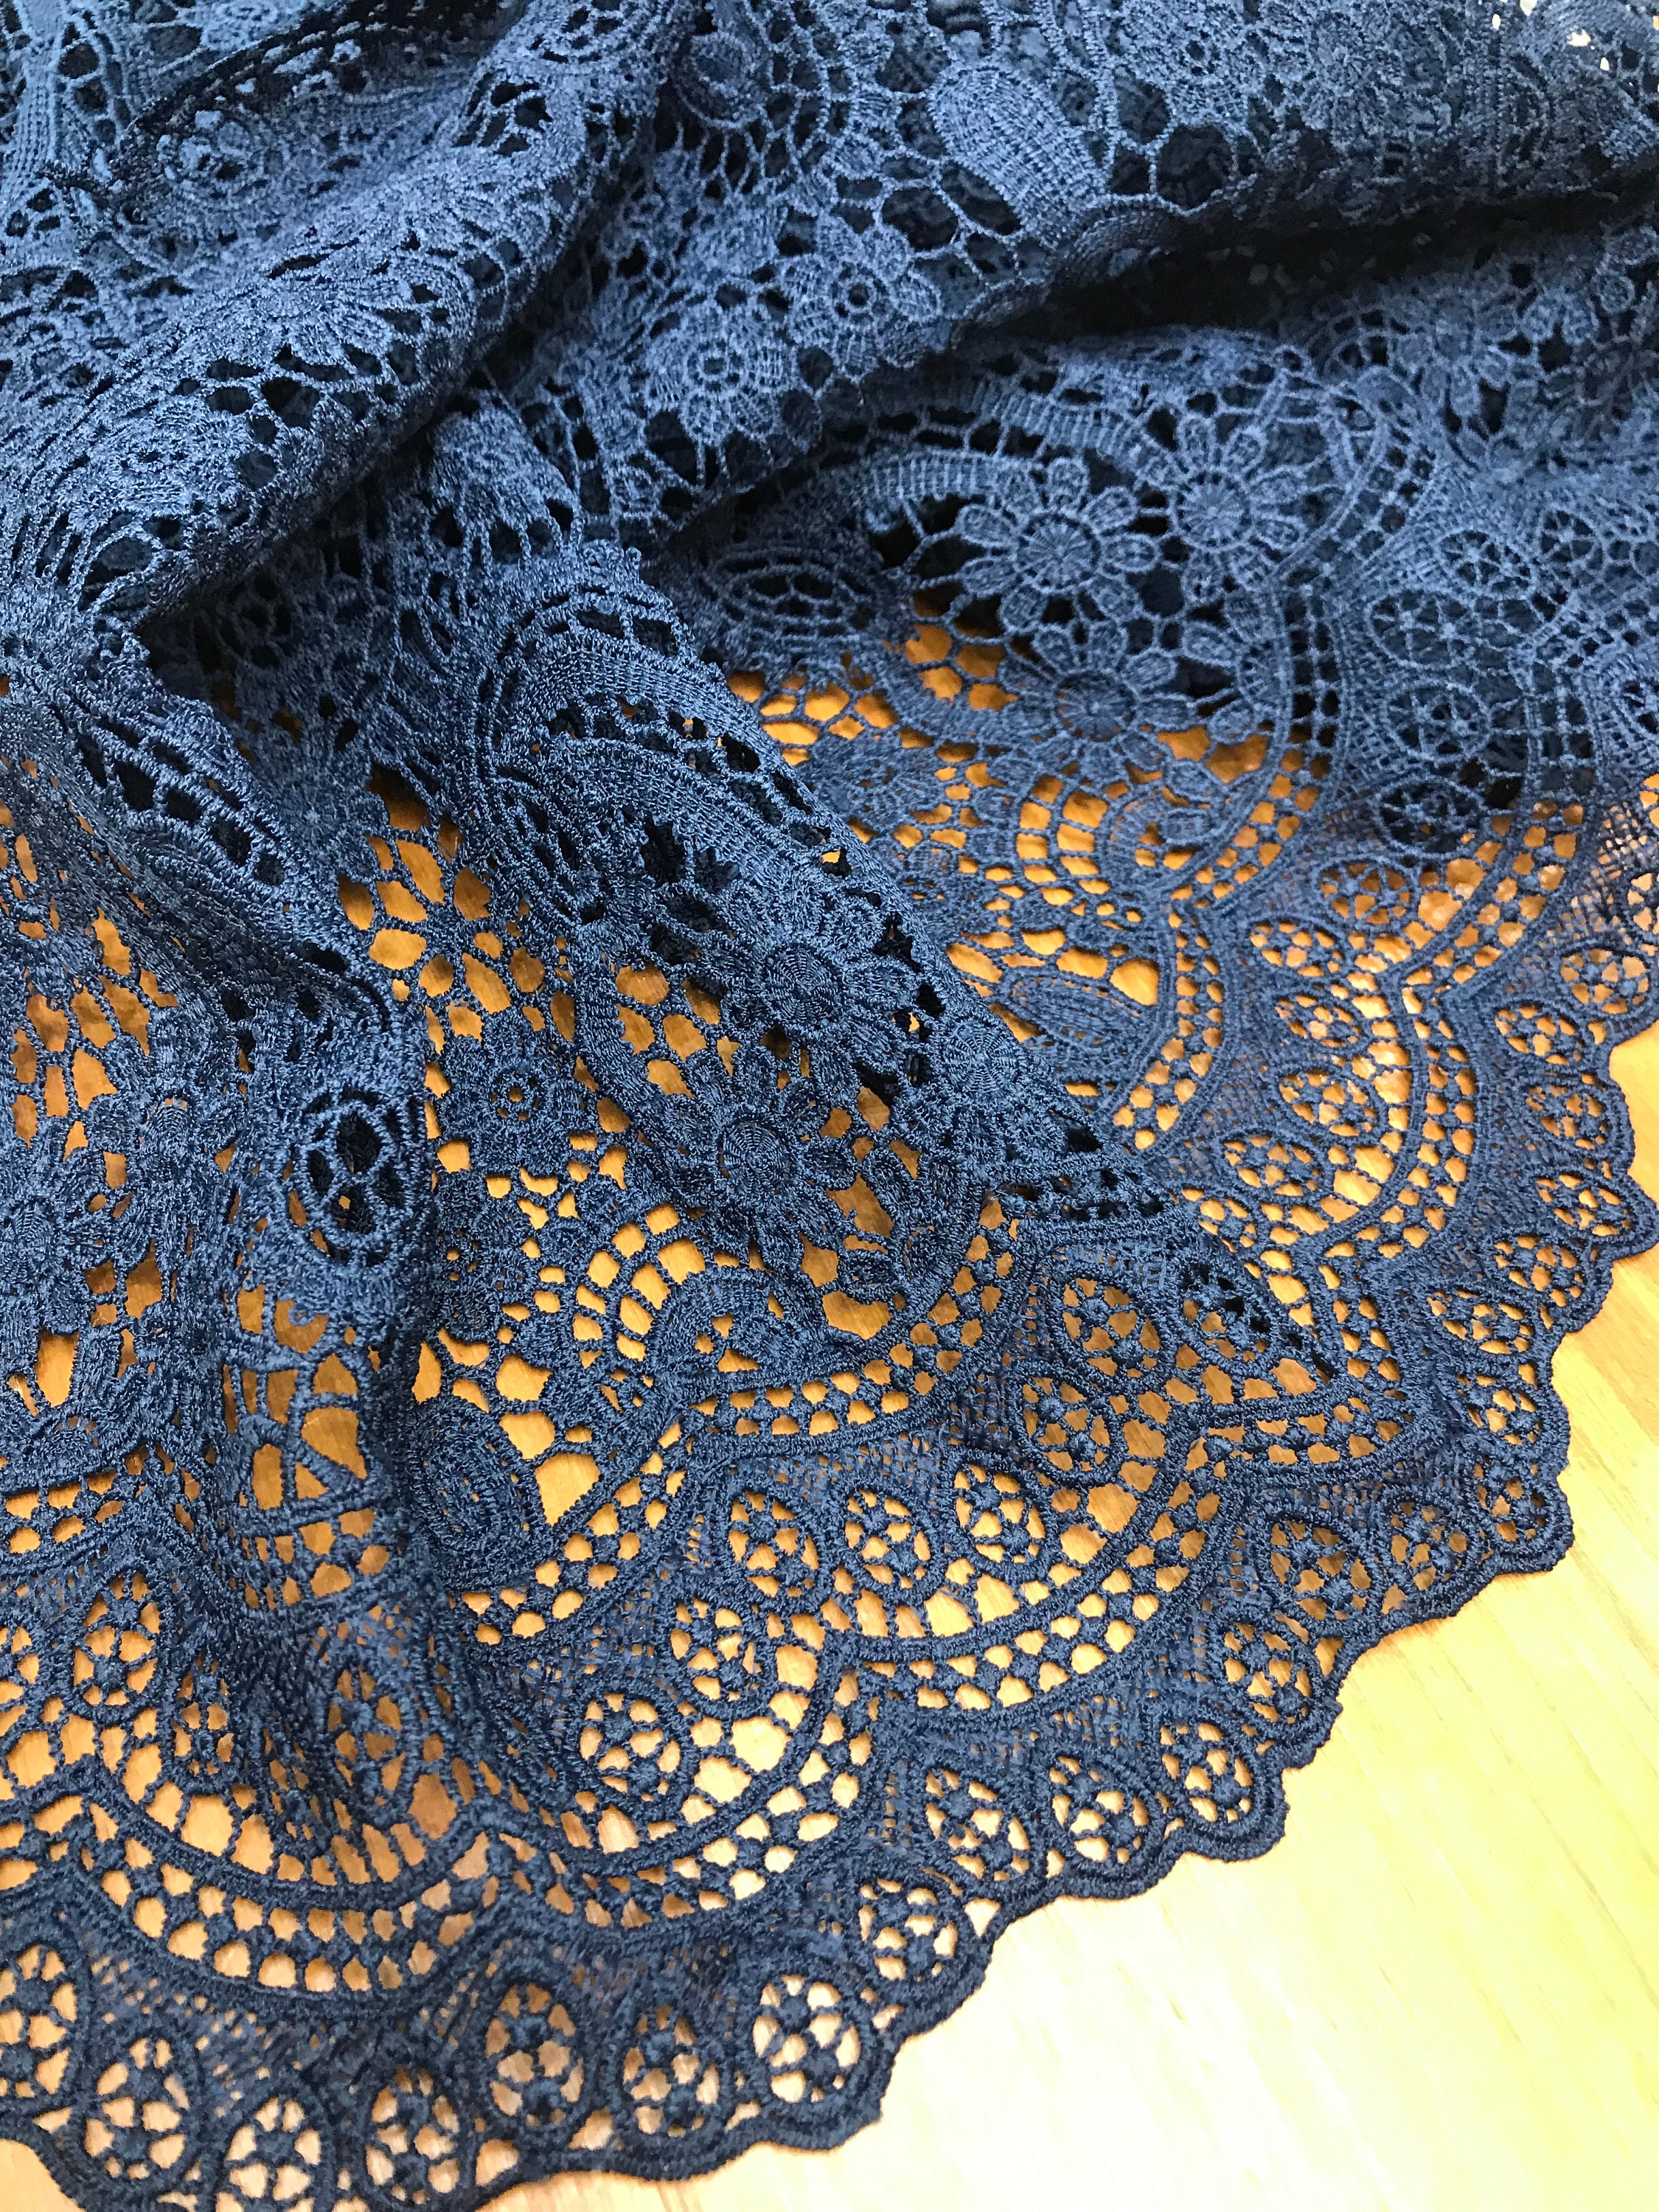 Navy Blue Cord Lace fashion Lace | Etsy ...